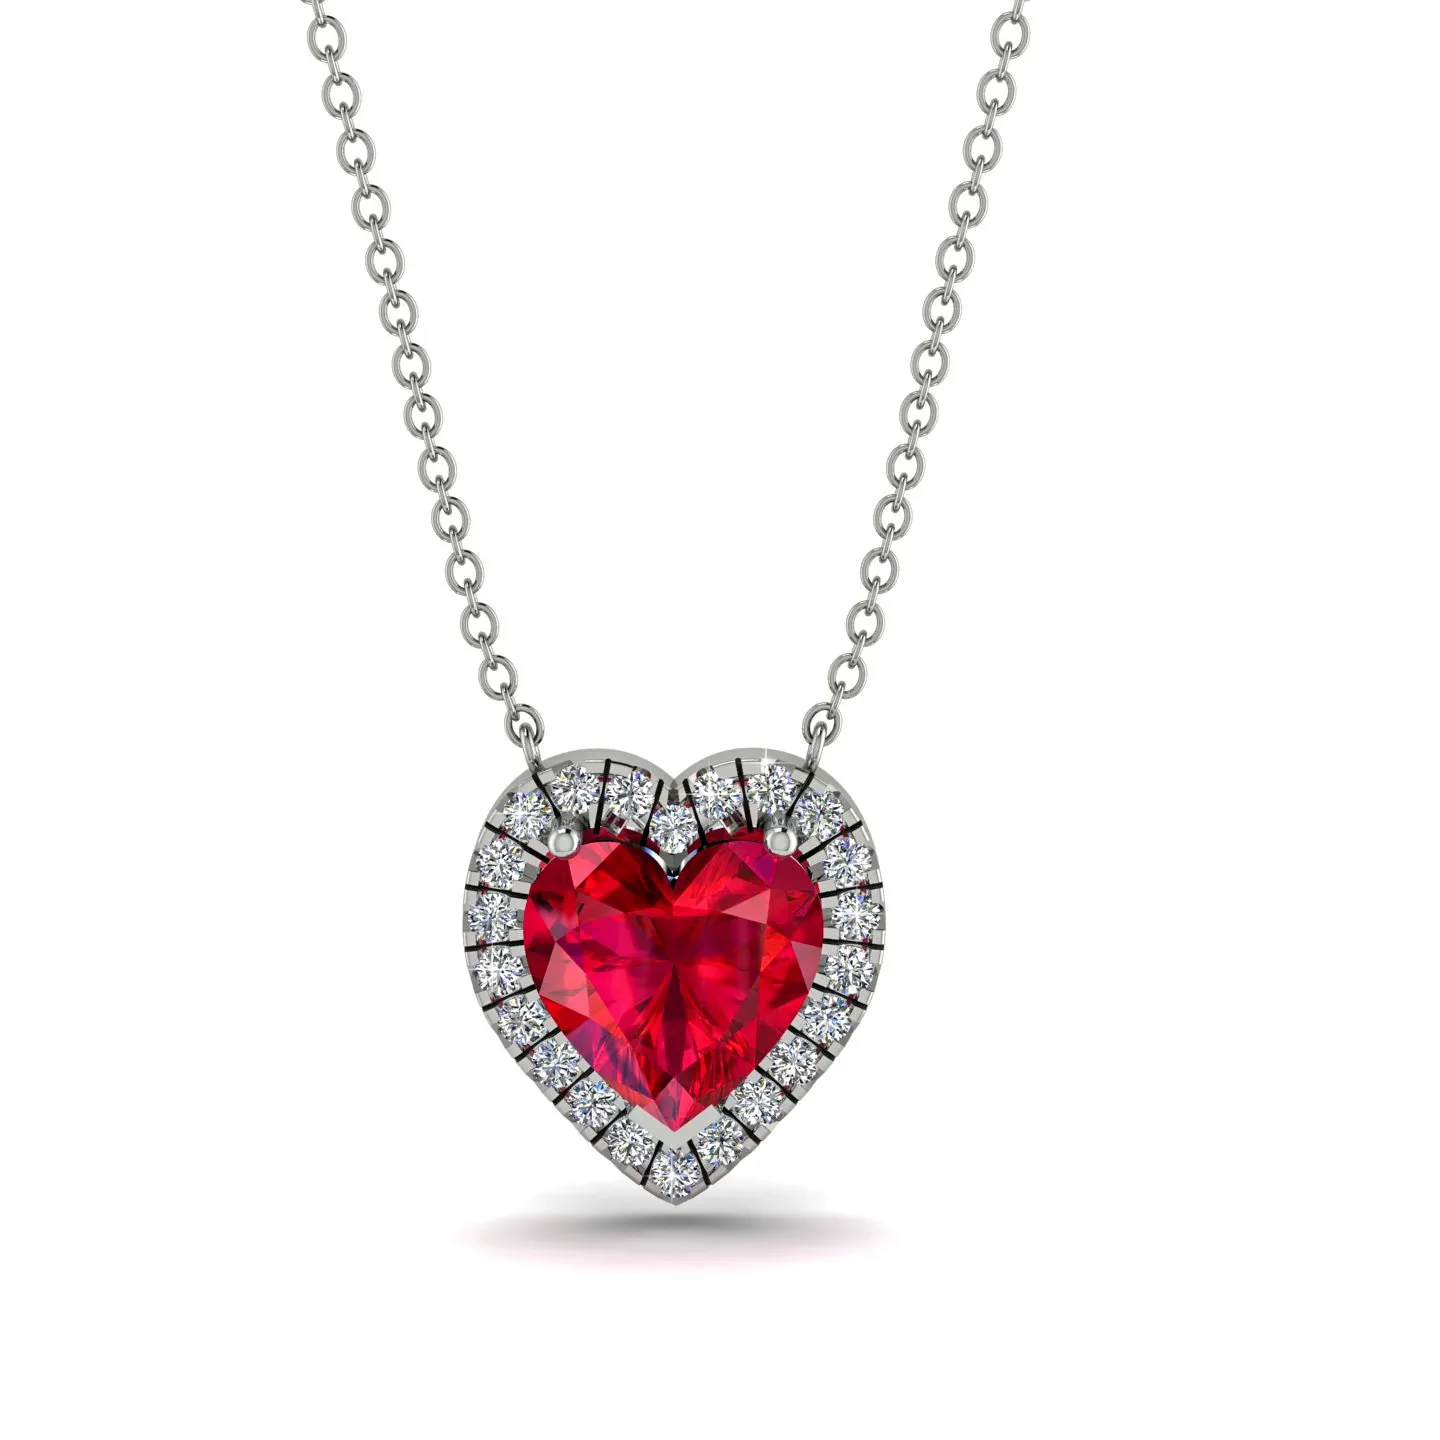 Image of 4.7Ct Ruby Halo Heart Necklace - Jaylene No. 12